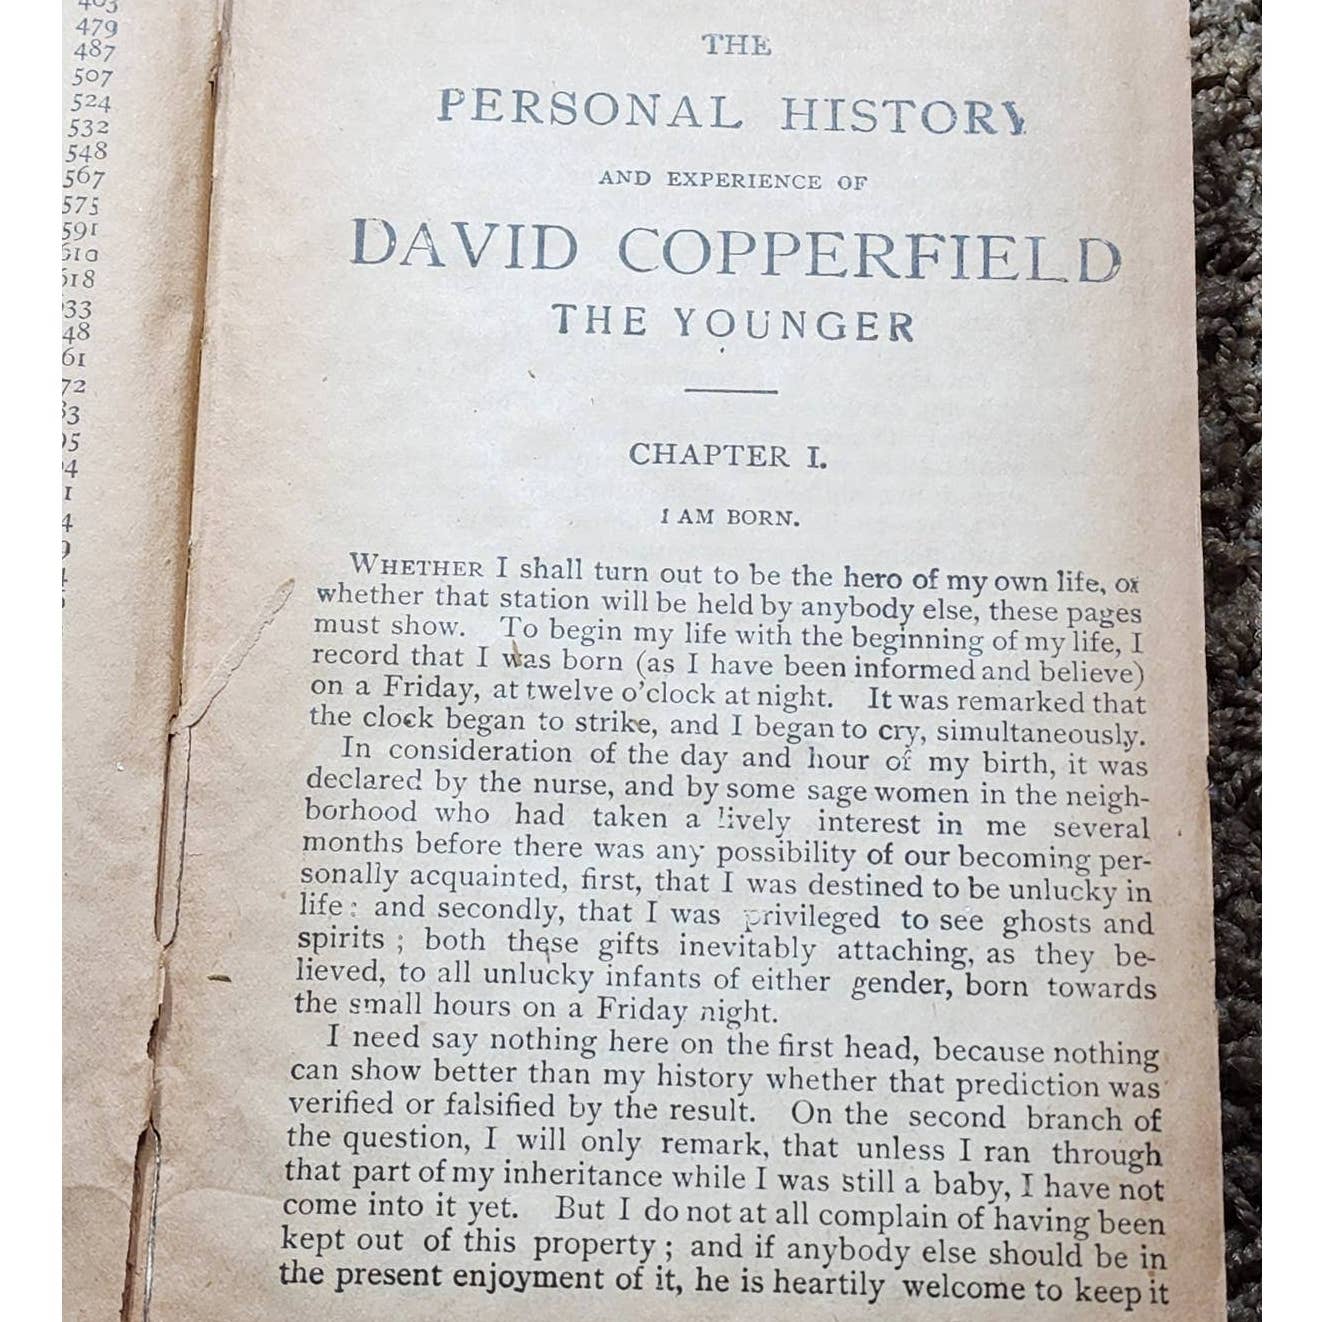 David Copperfield By Charles Dickens, Companion Books, Antiquarian Book